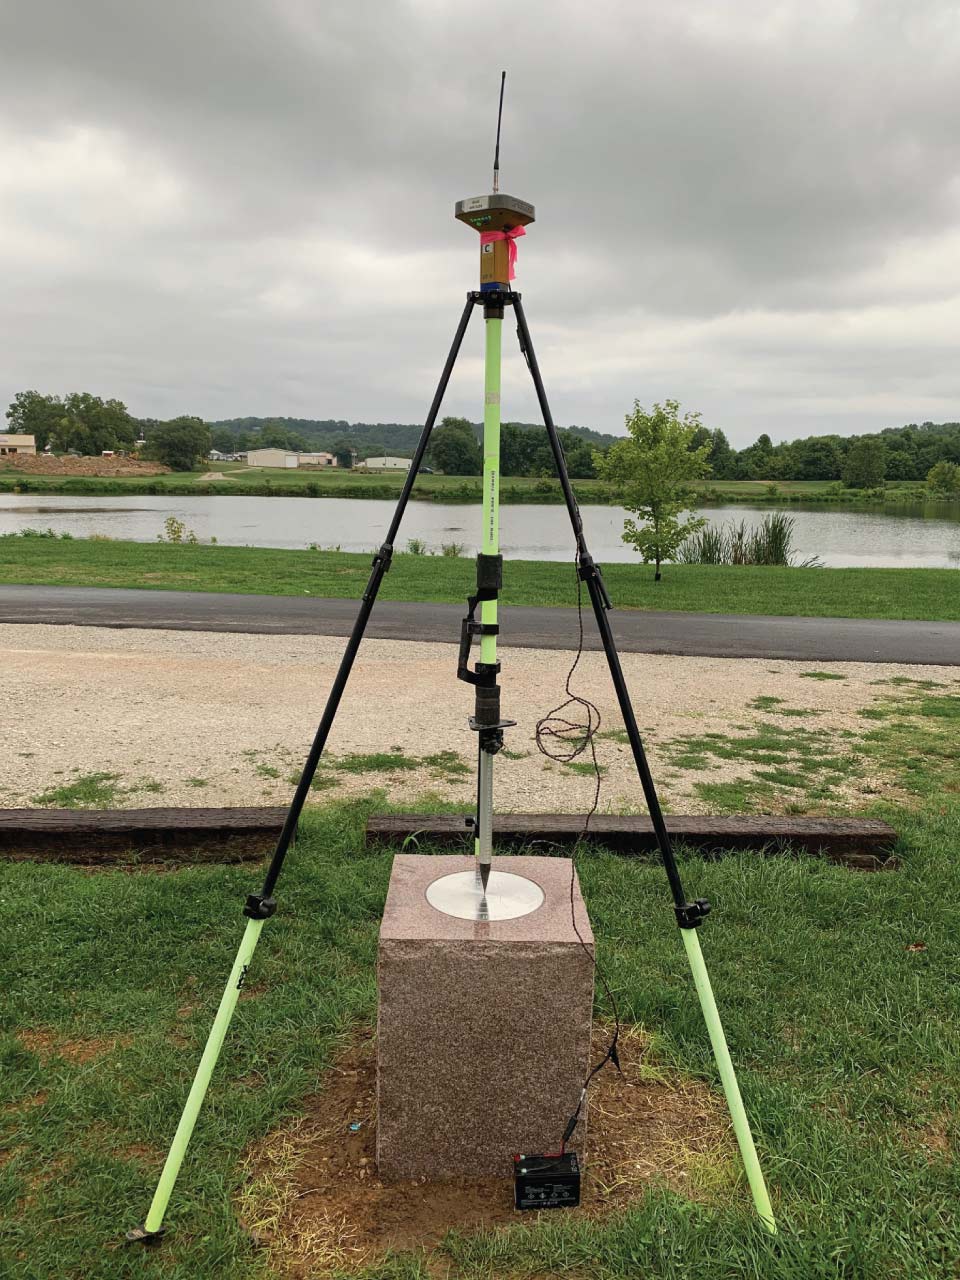 This survey tripod was used to precisely measure the location of the commemorative marker for the 2020 U.S. Center of Population in Hartville, Missouri.